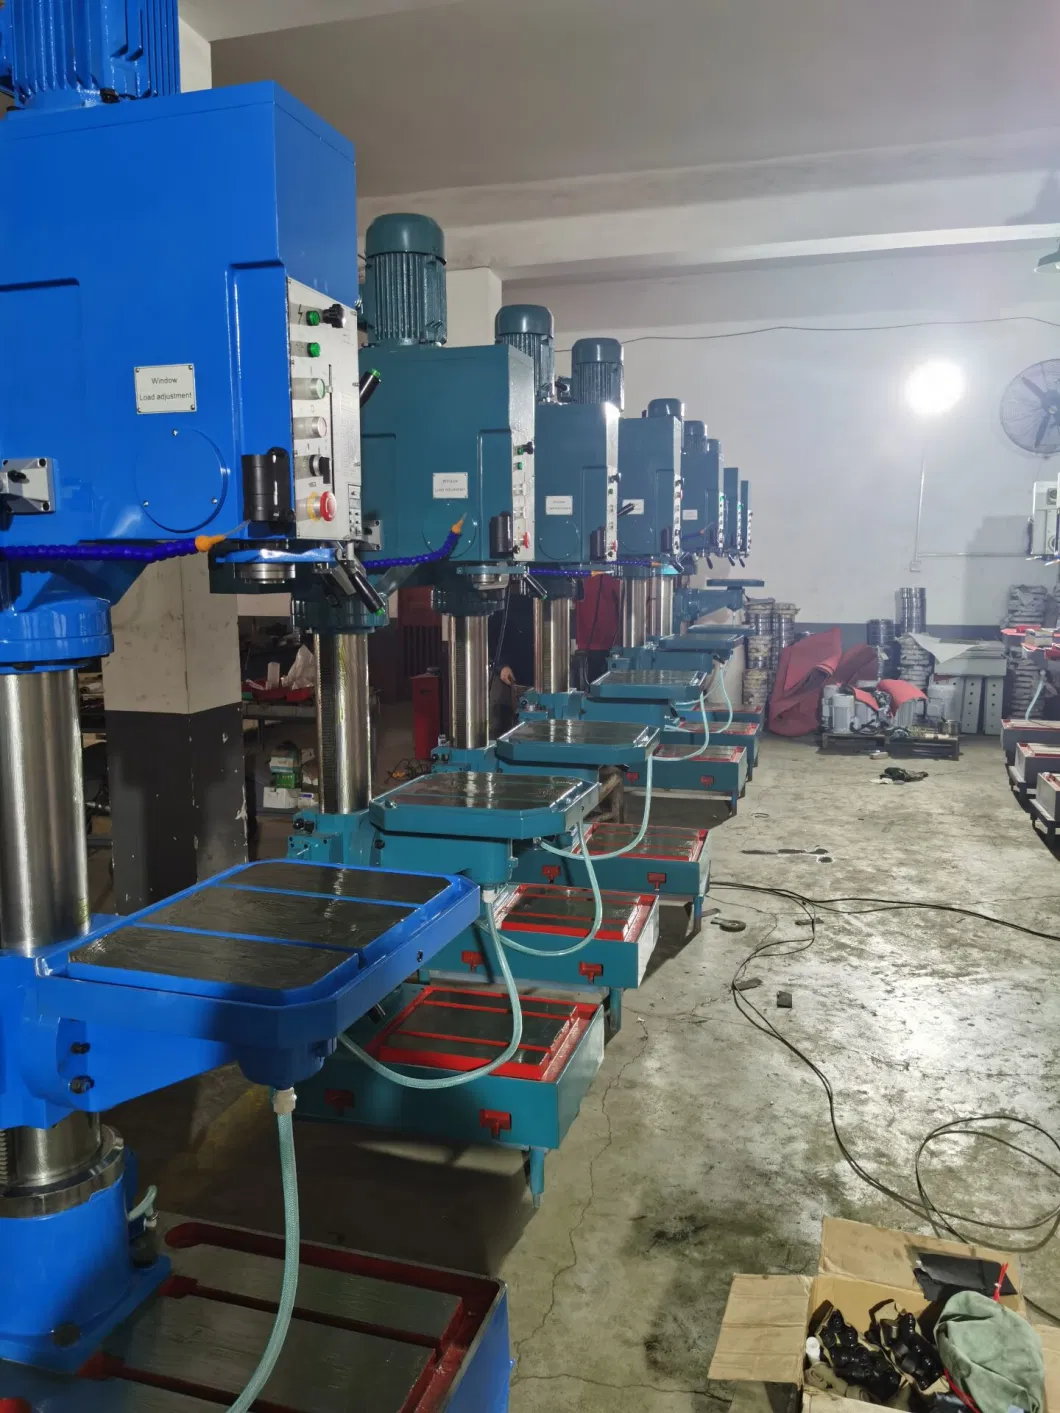 Drill Capacity From 13mm to 80mm Big Sale High Quality Drilling Machine with Iron Cast Table Vertical Mini Bench Box Column Pillar Drill Press Drilling Machine